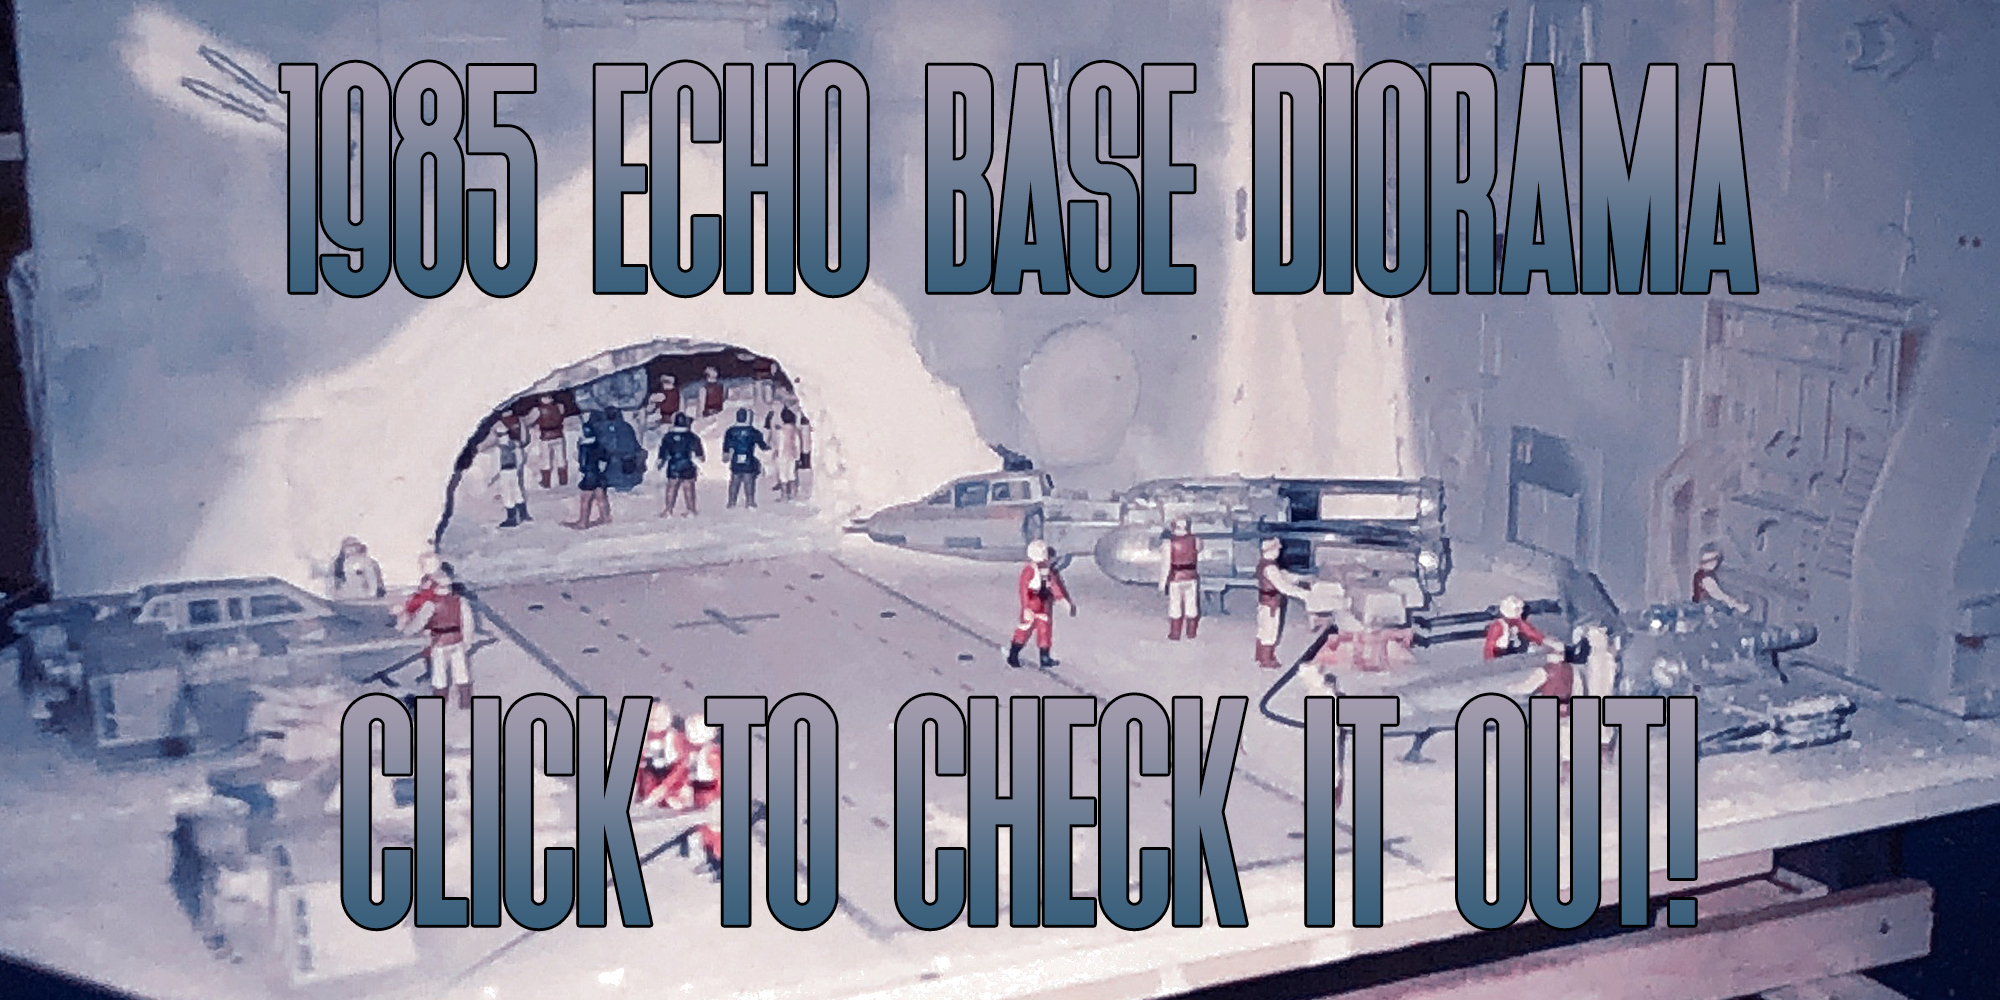 The Amazing Echo Base Diorama From 1985